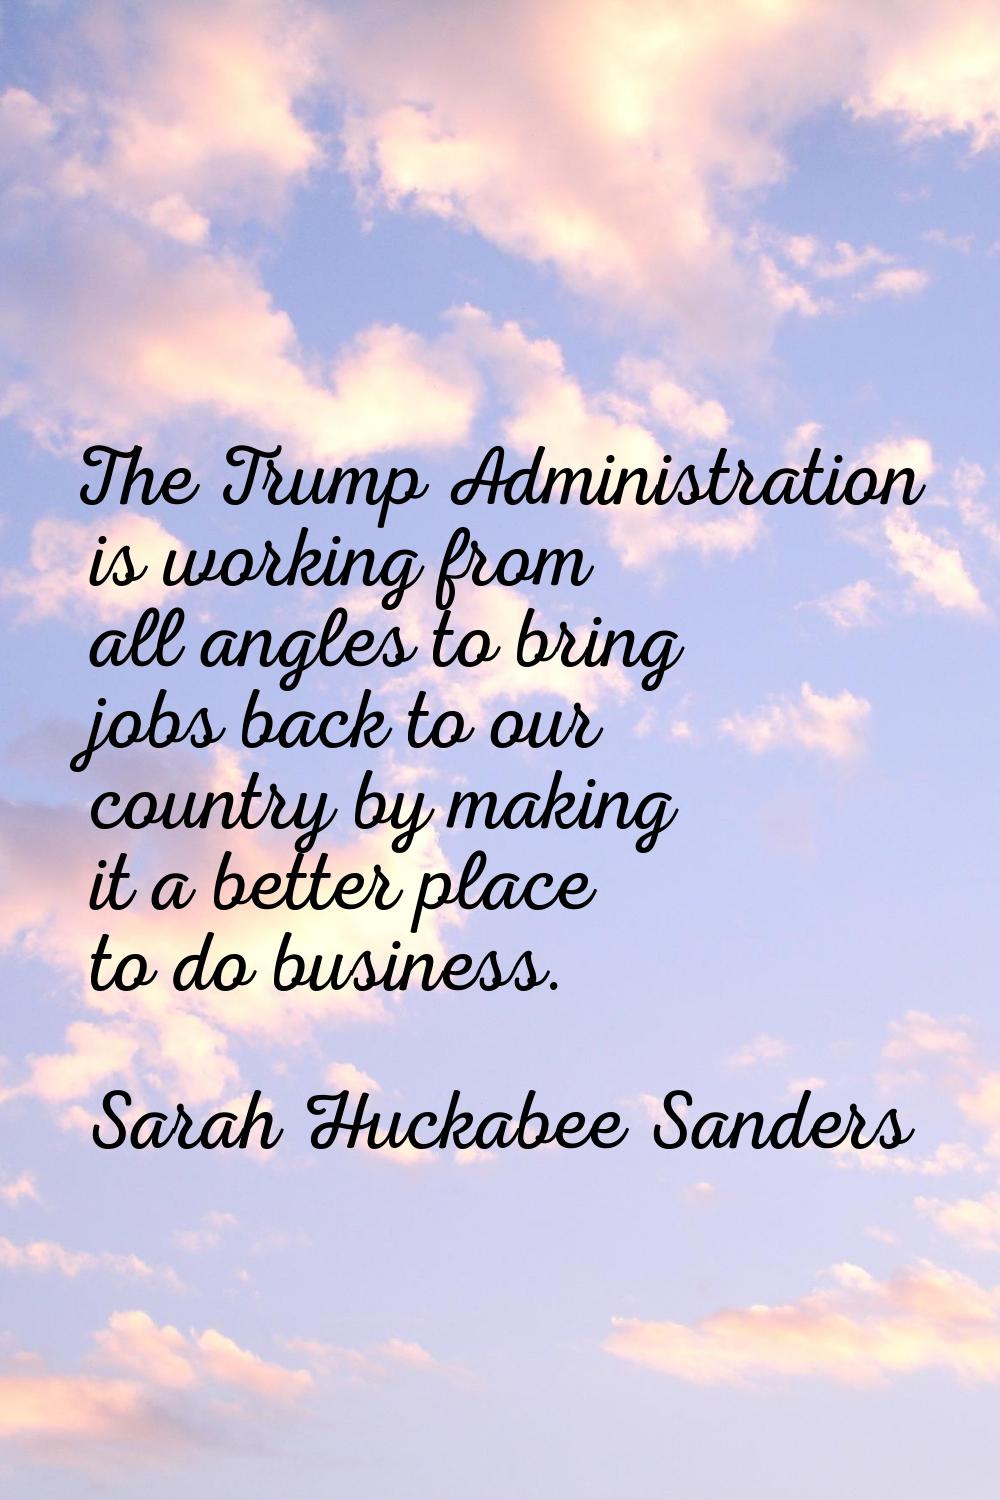 The Trump Administration is working from all angles to bring jobs back to our country by making it 